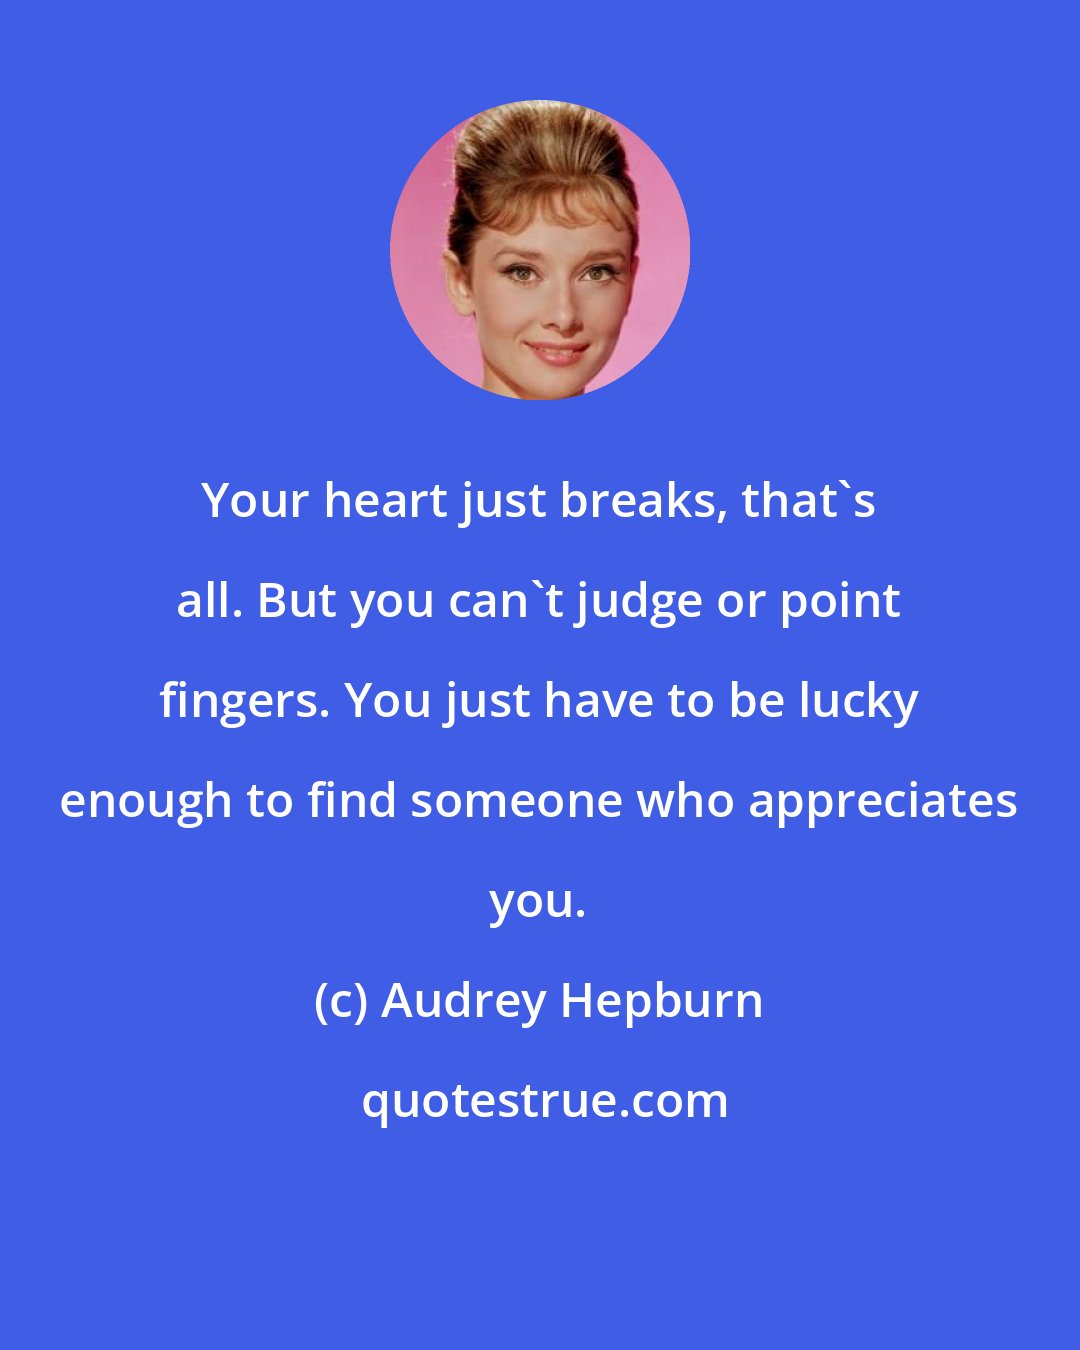 Audrey Hepburn: Your heart just breaks, that's all. But you can't judge or point fingers. You just have to be lucky enough to find someone who appreciates you.